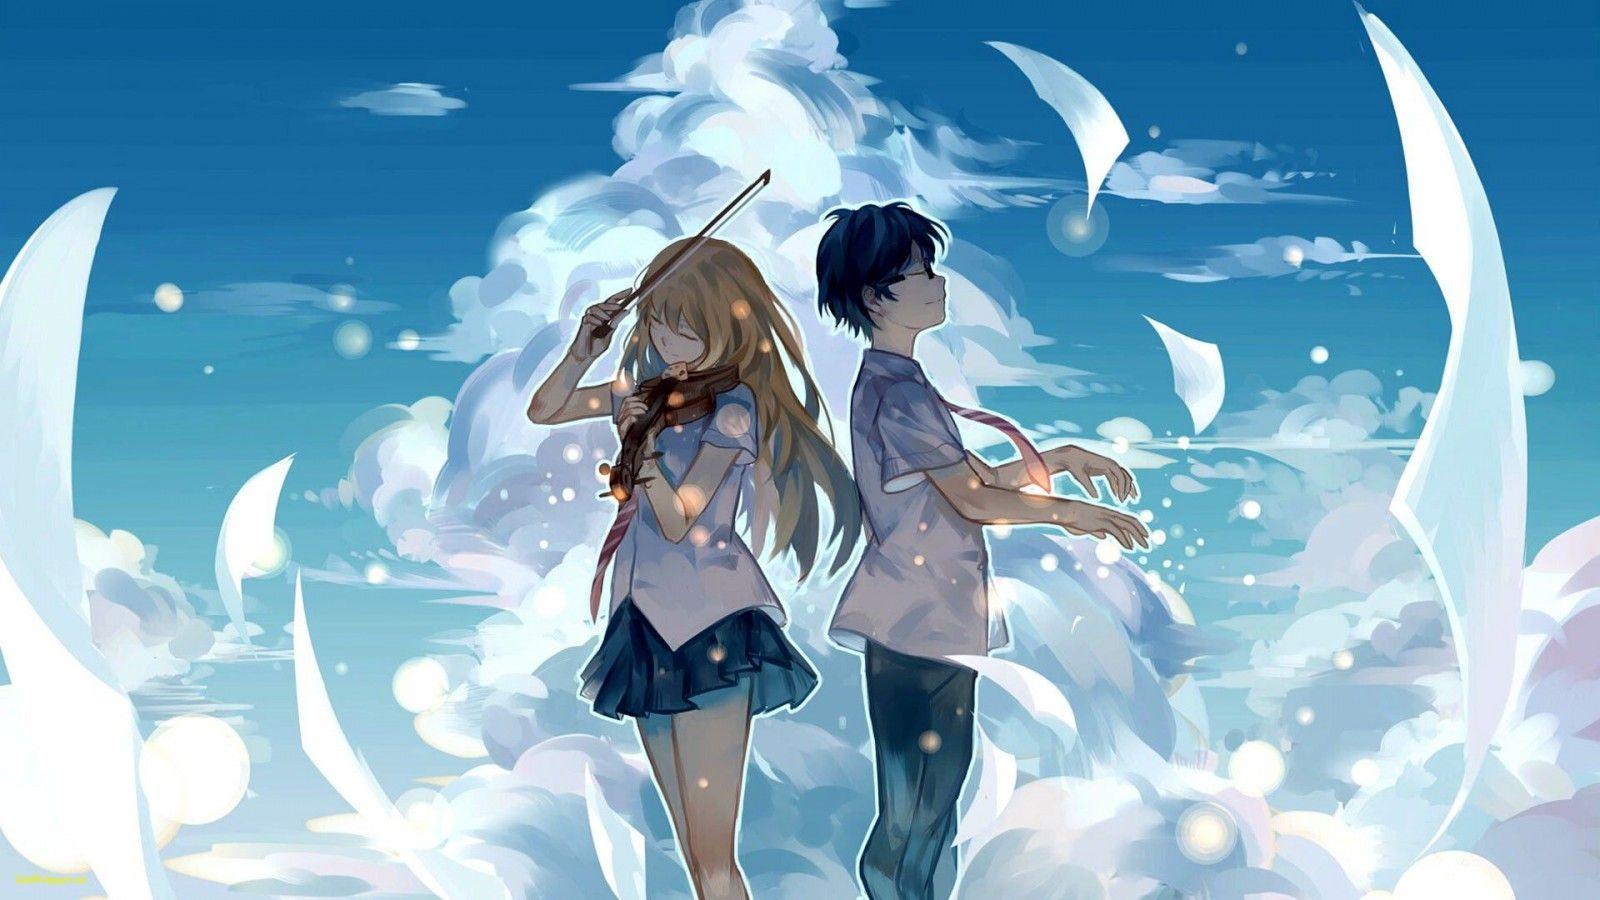 Aesthetic Couple Anime Wallpapers - Top Free Aesthetic ...